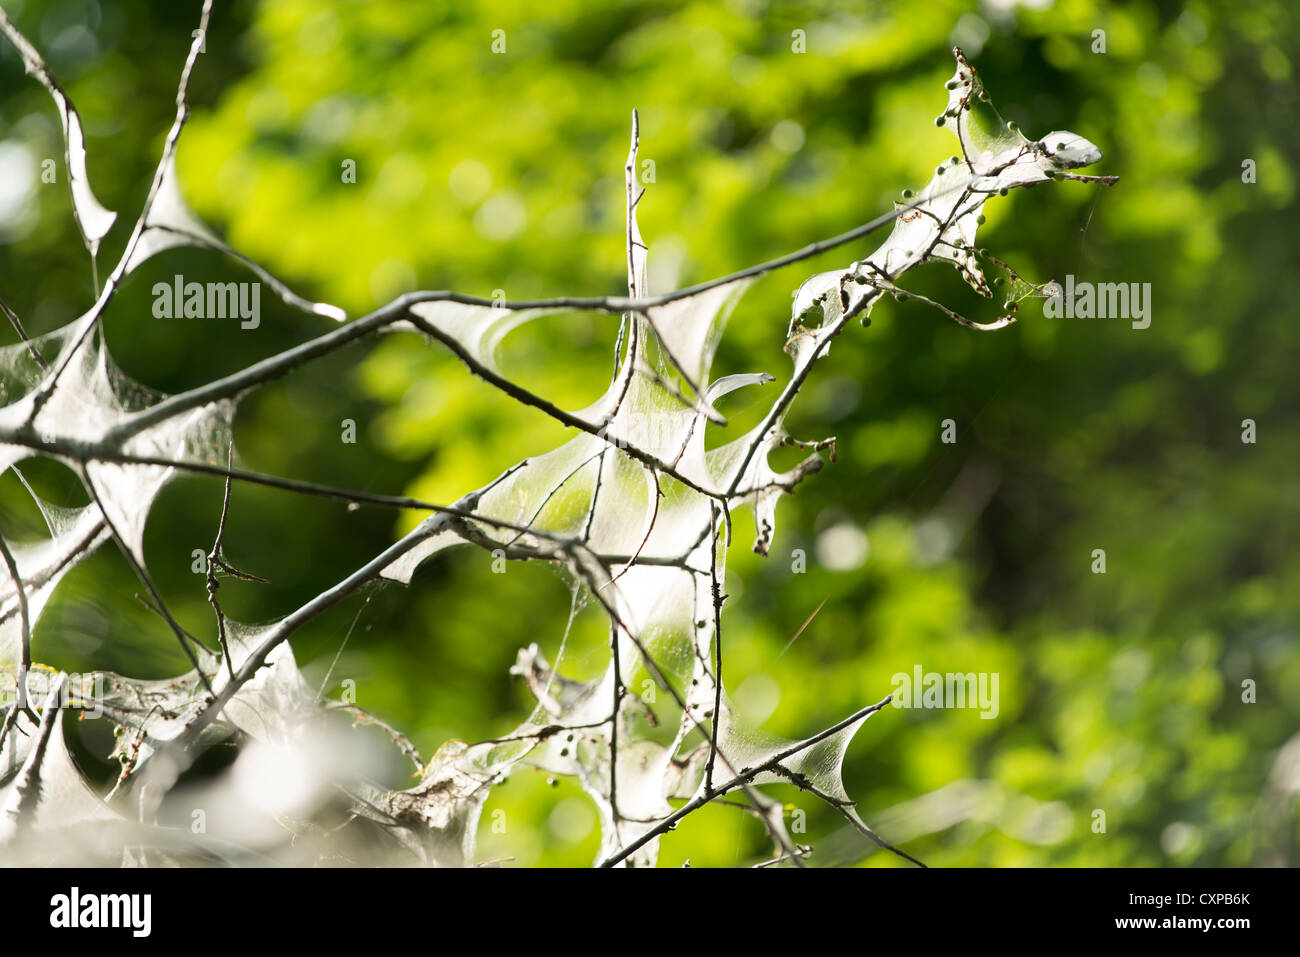 Webs of the tent caterpillar in the branches of a tree Stock Photo